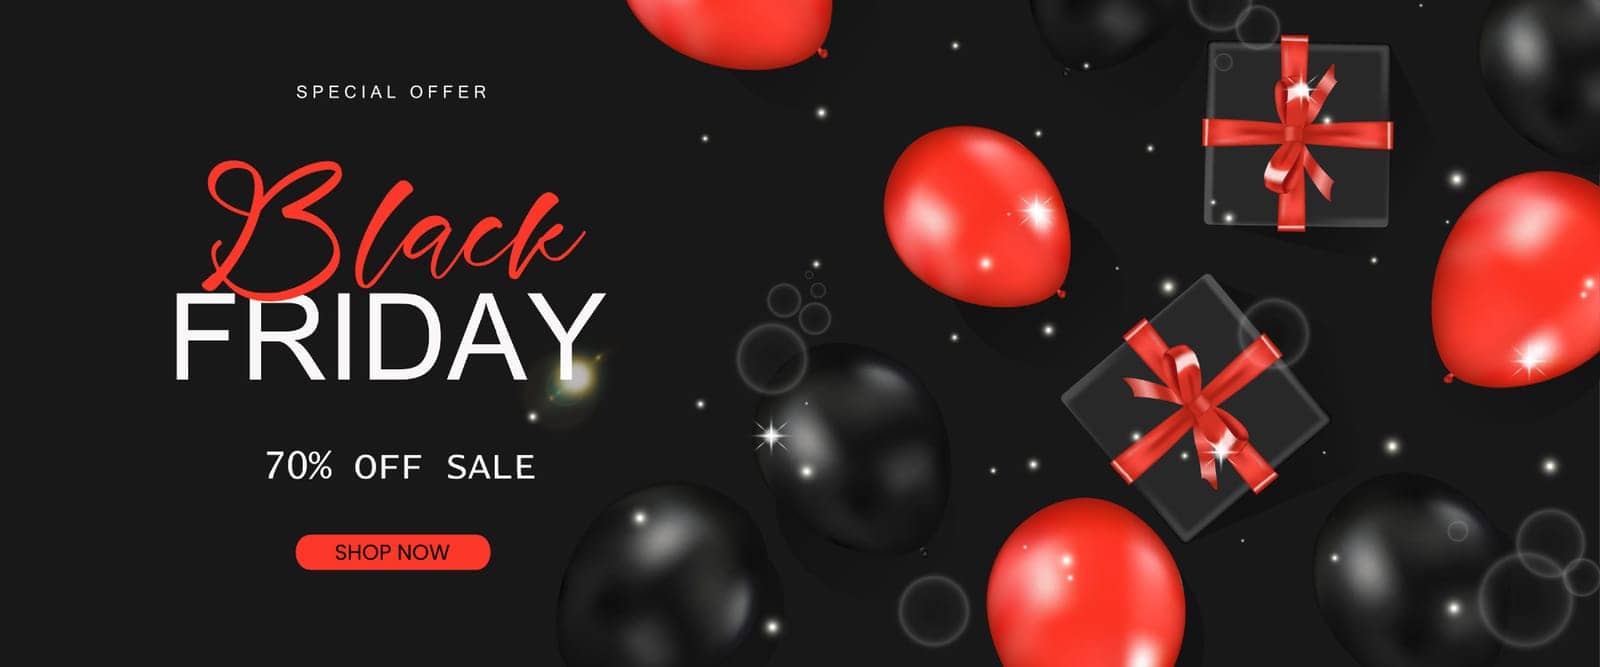 Black friday sale promotion poster with shiny balloons and gift box, Shopping sale and discount festive. Vector illustration.